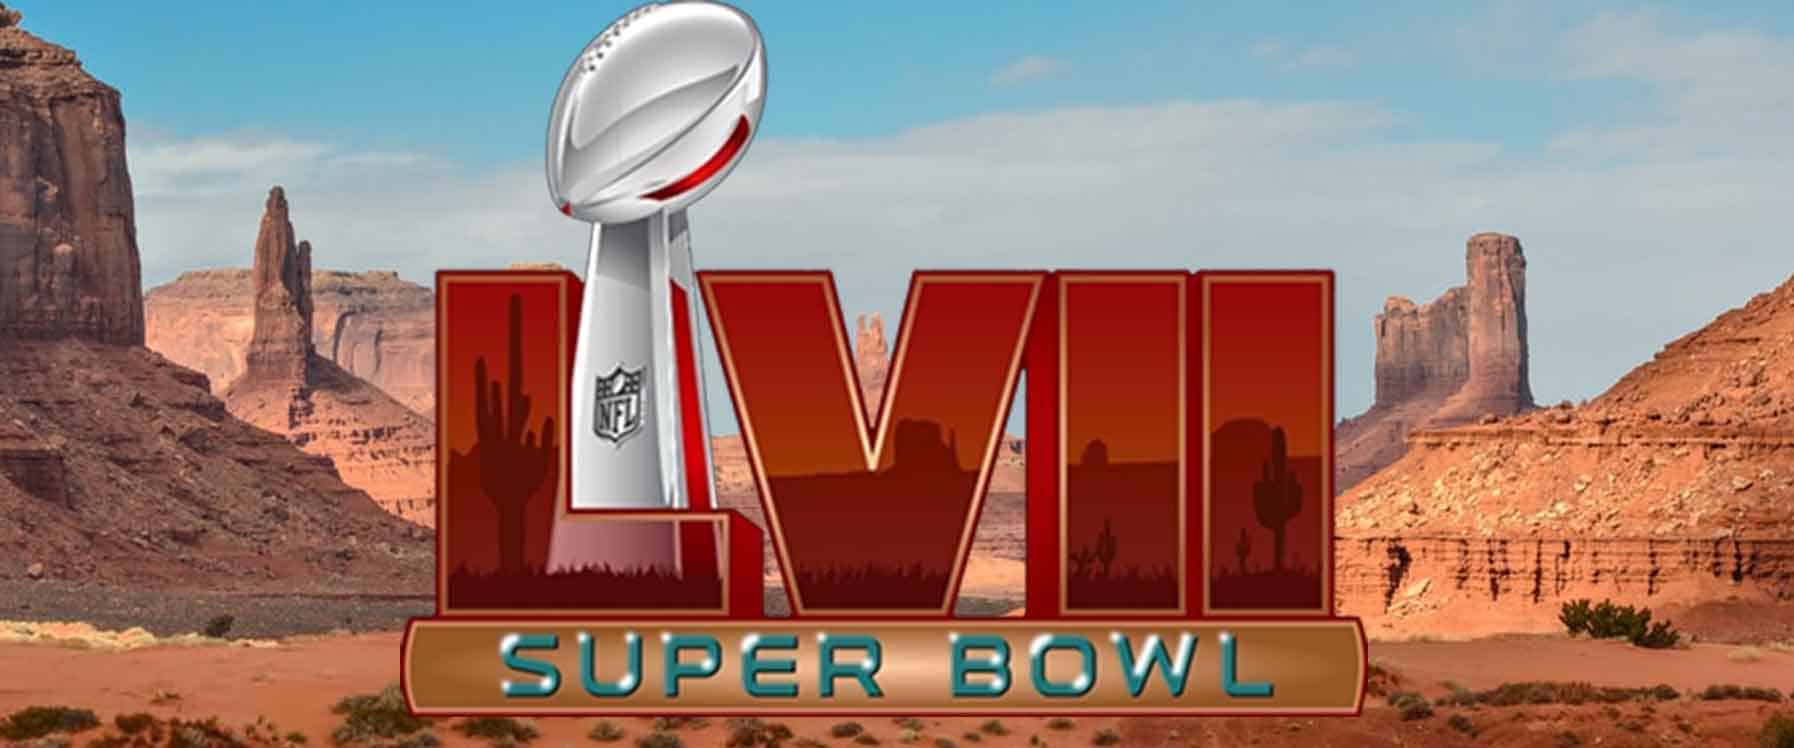 betting on Super Bowl 57 odds promo for SBL